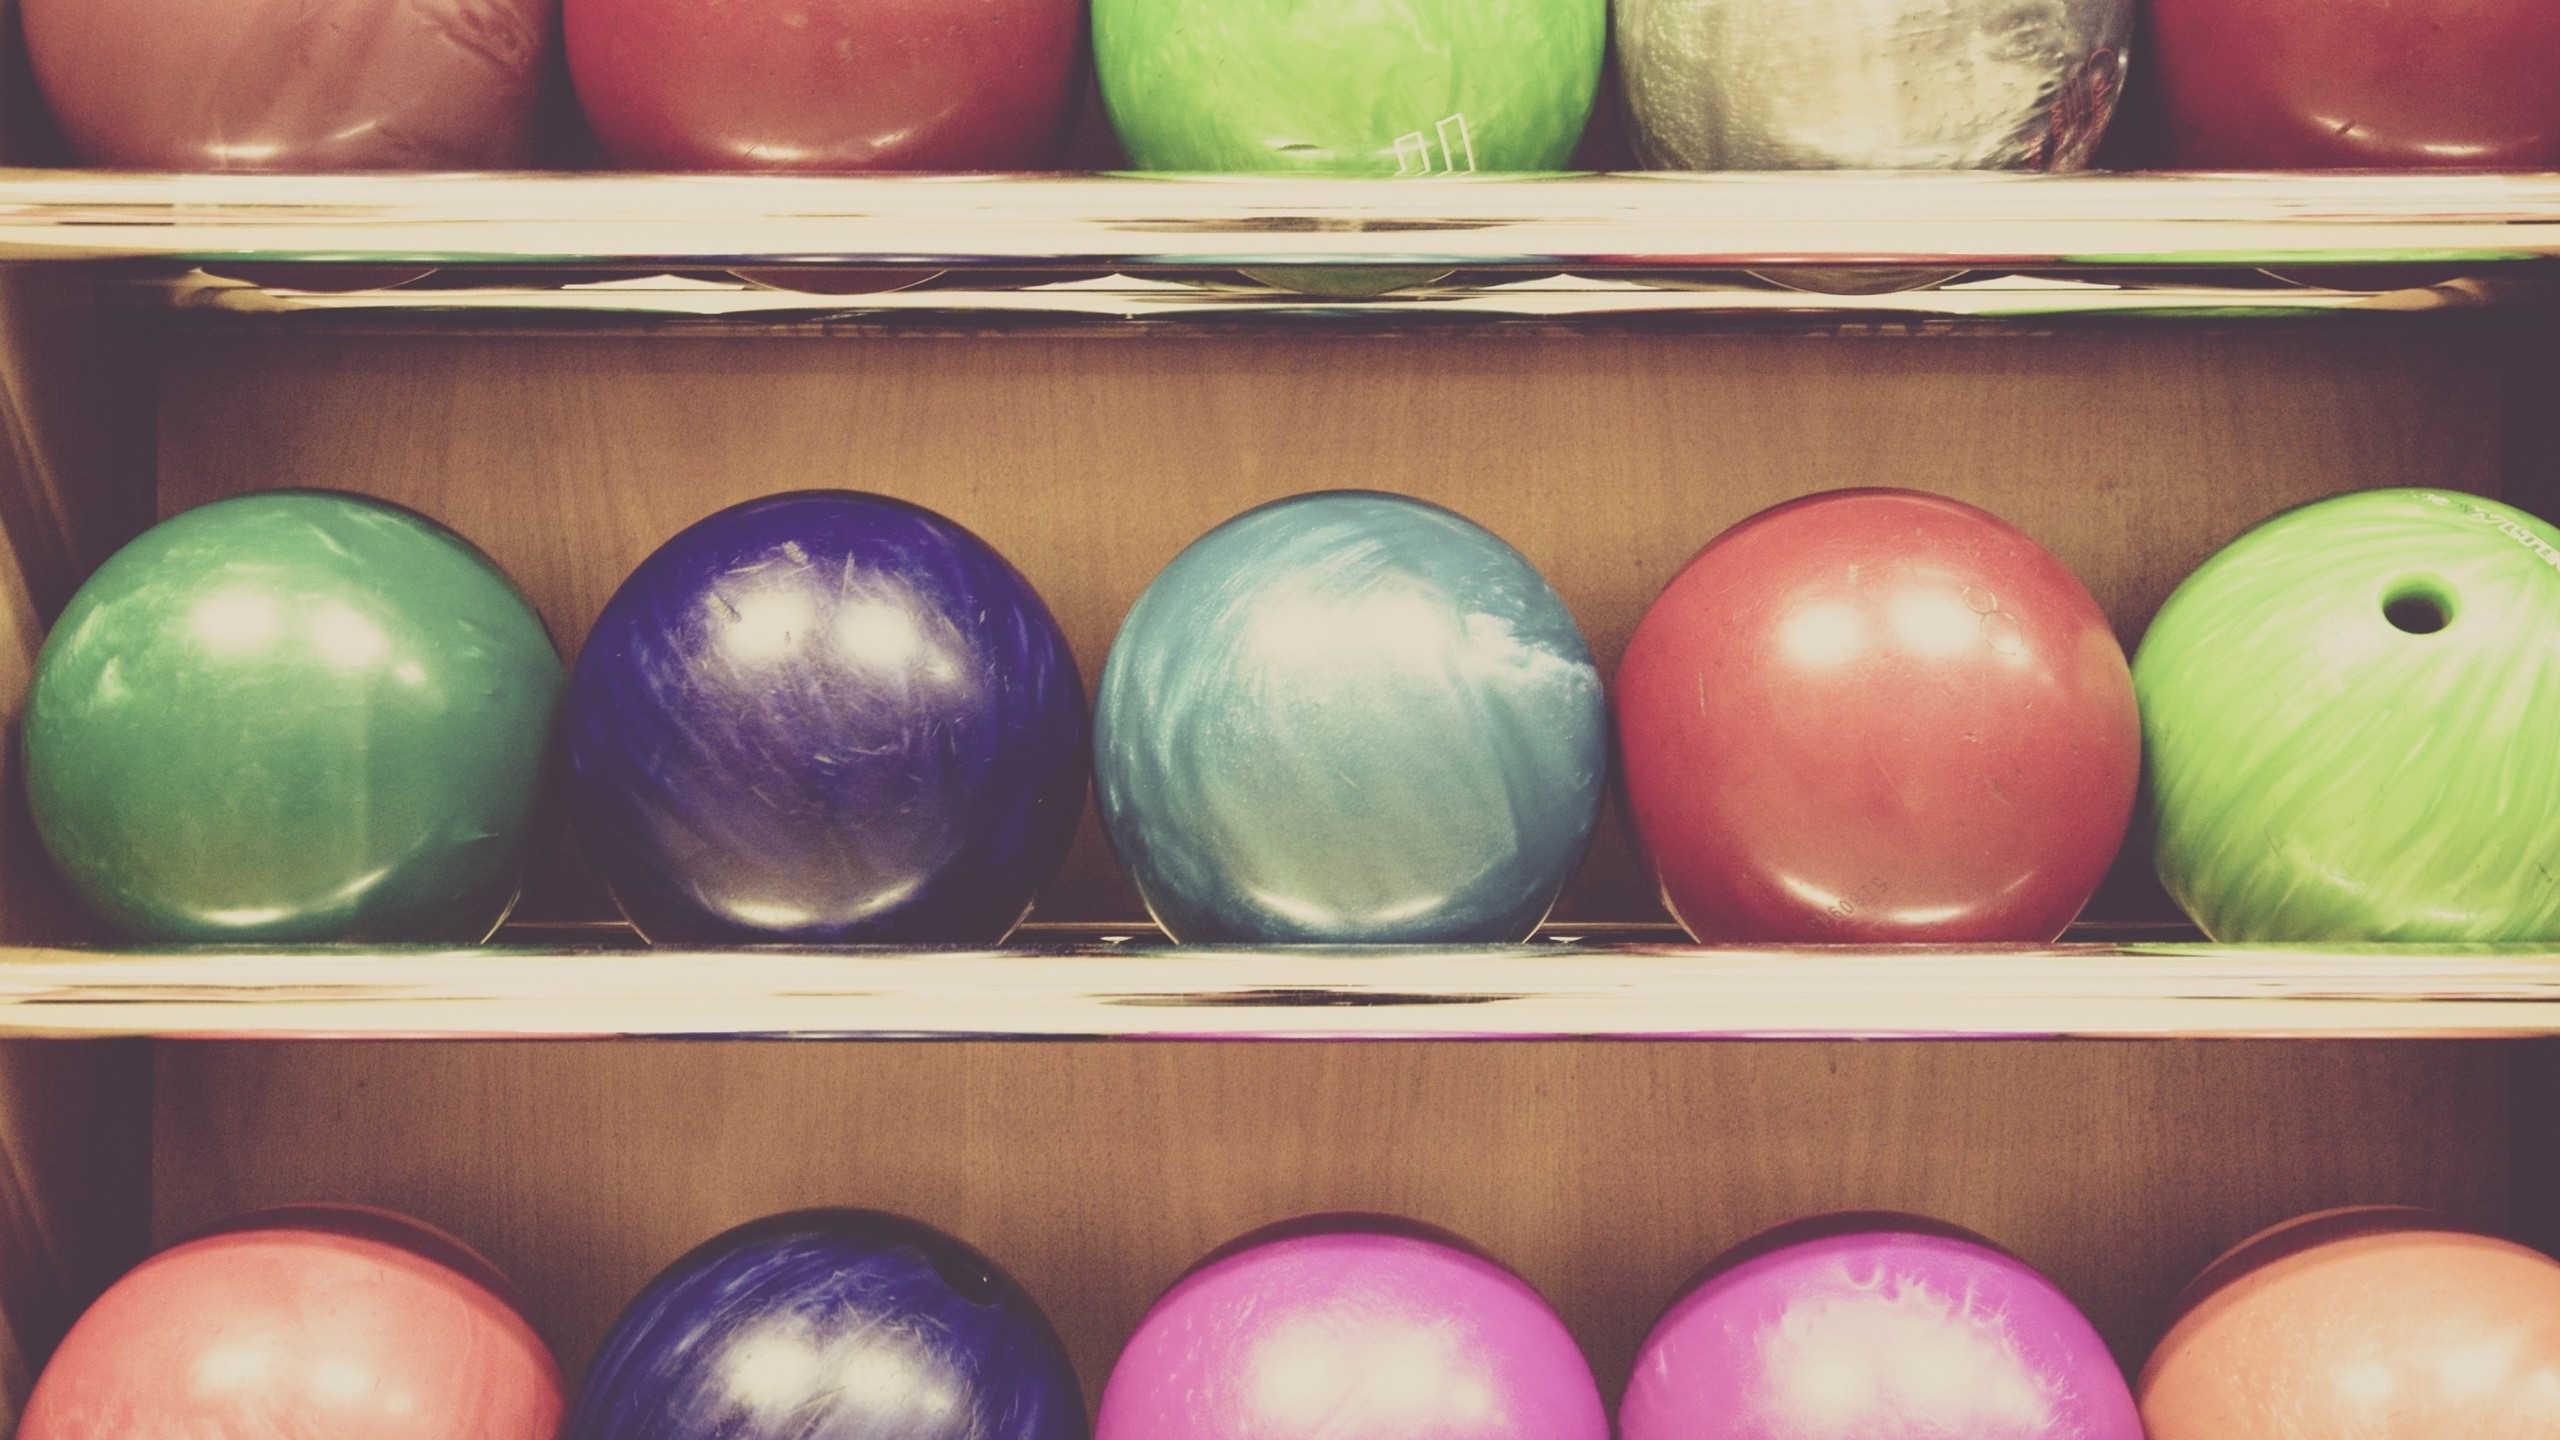 Bowling Balls for 2560x1440 HDTV resolution